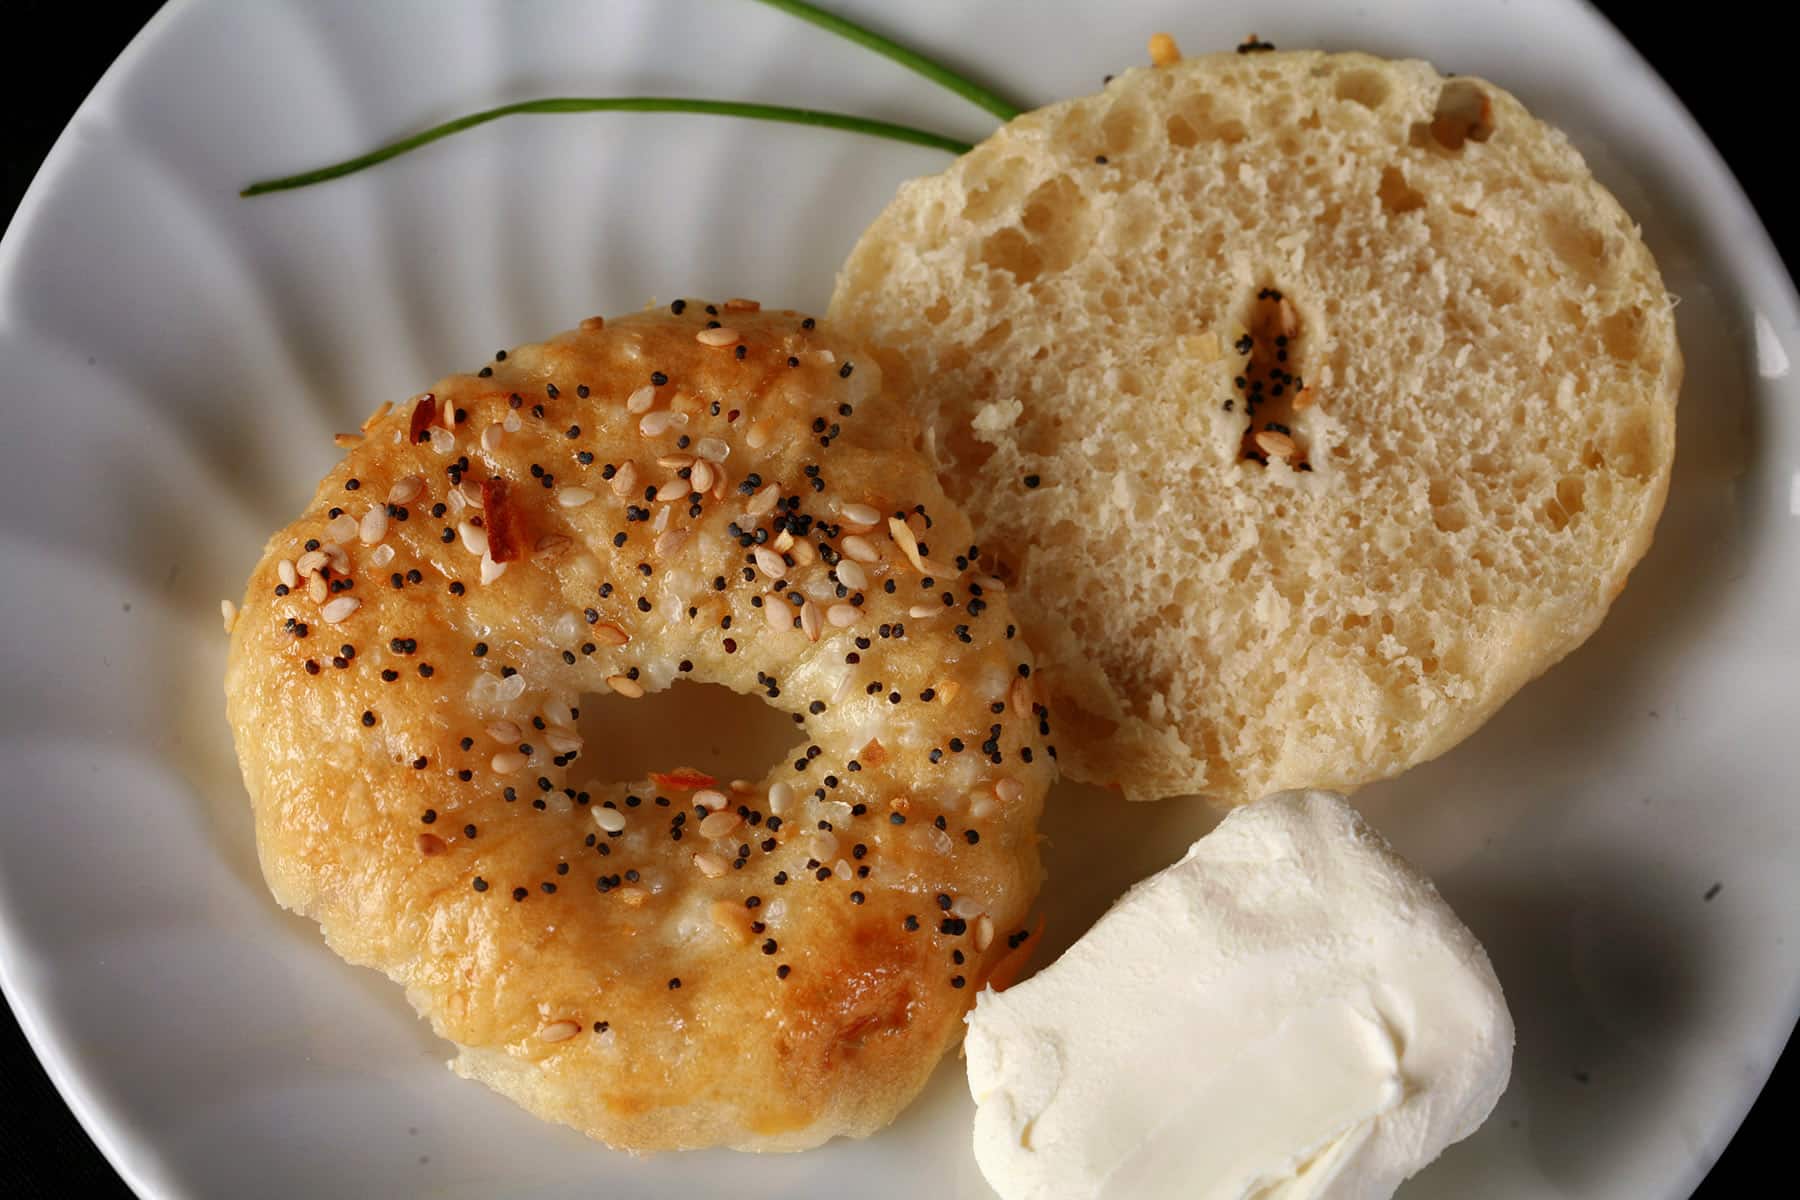 A sliced mini bagel on a plate, with some cream cheese next to it.